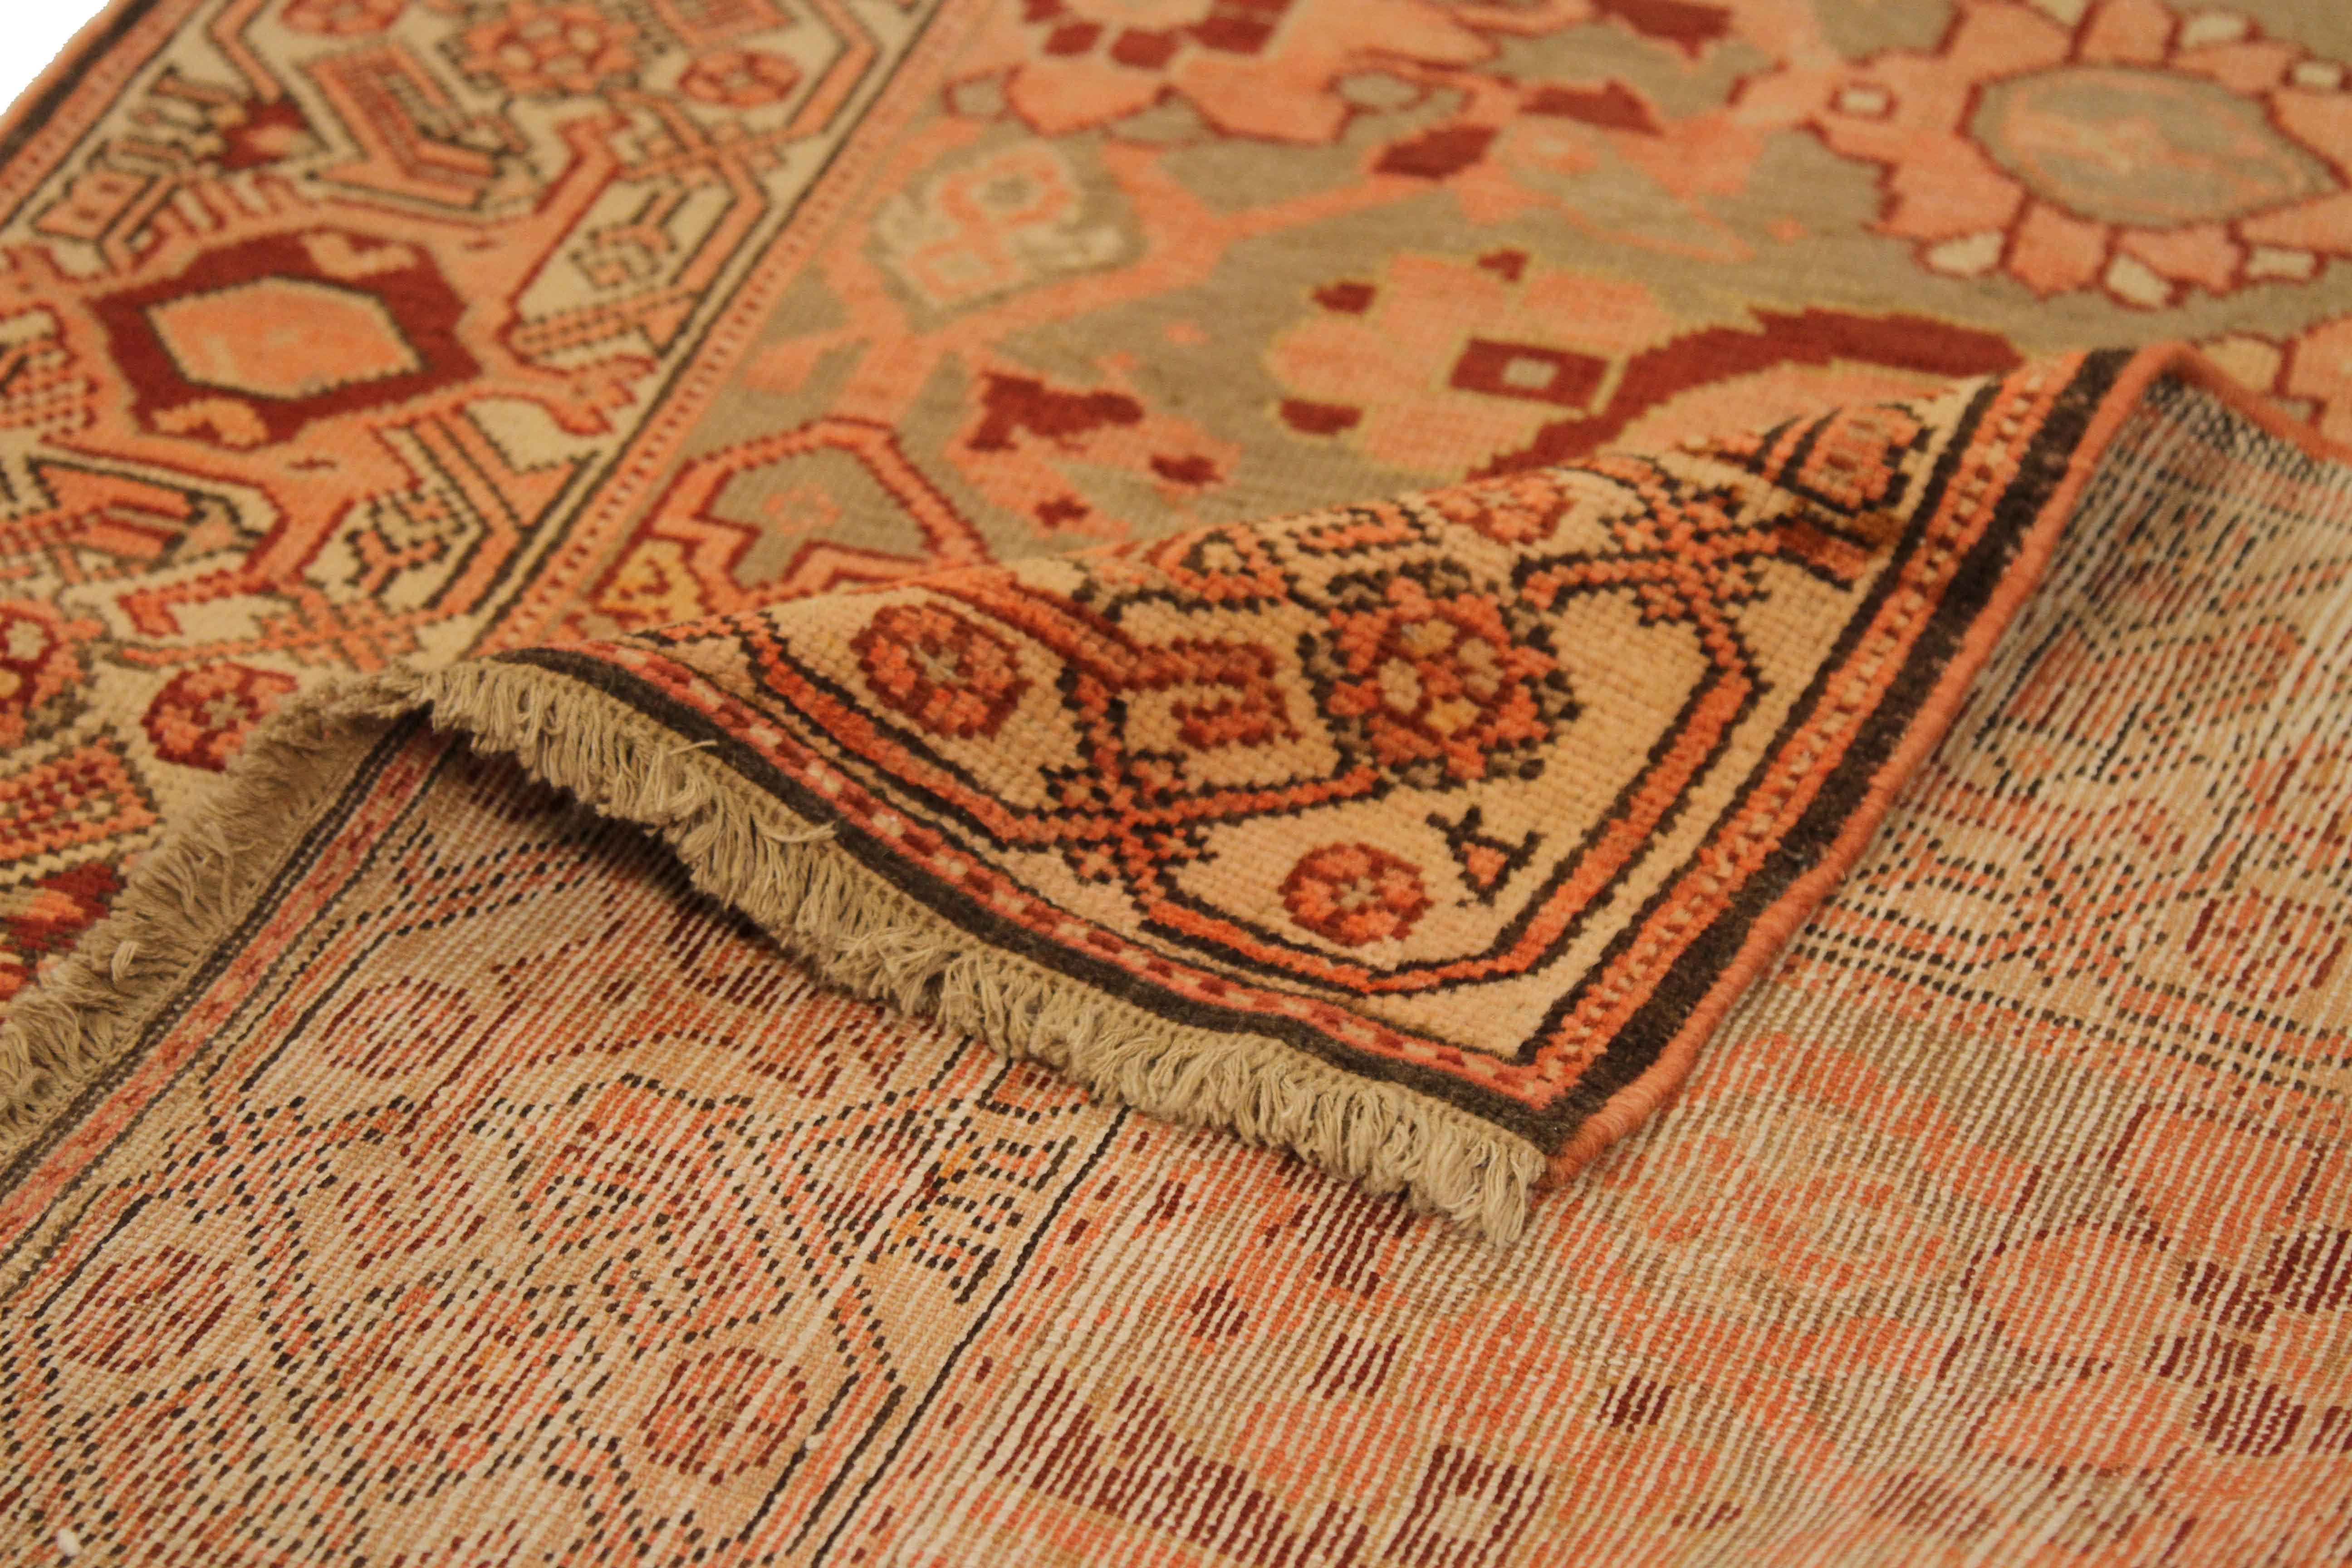 Handmade using the highest quality of wool, this antique Persian rug was made in Malayer fashion featuring a fiery display of floral patterns in red, orange, yellow, and beige. This piece can add contrast to a space in contemporary, Minimalist, and